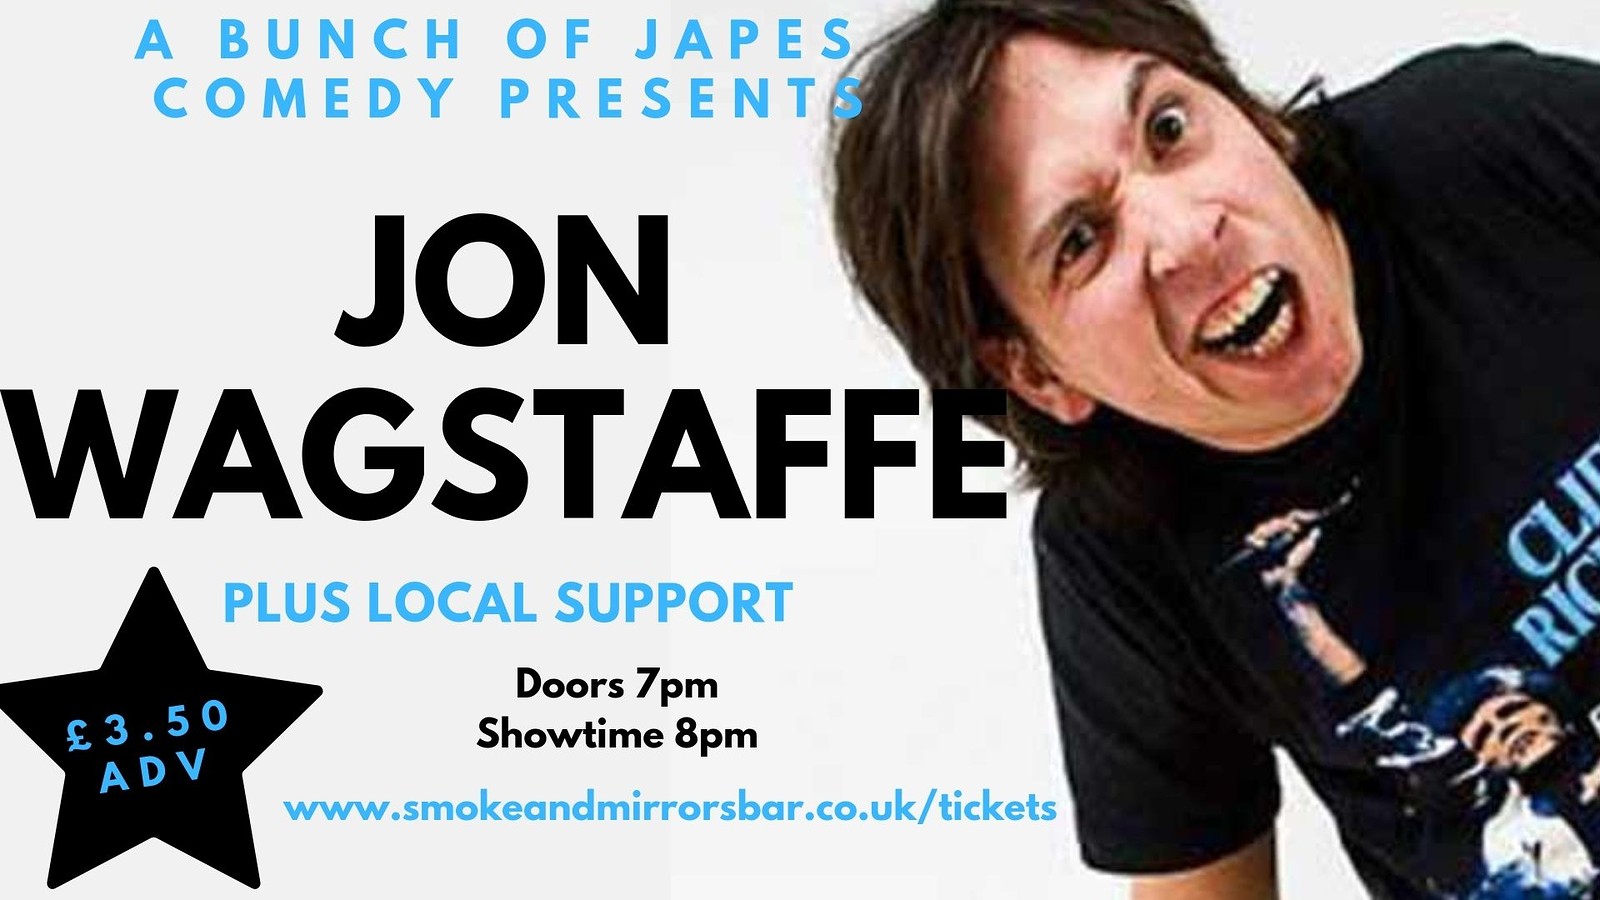 Stand-Up Comedy New Material with Jon Wagstaffe at Smoke & Mirrors